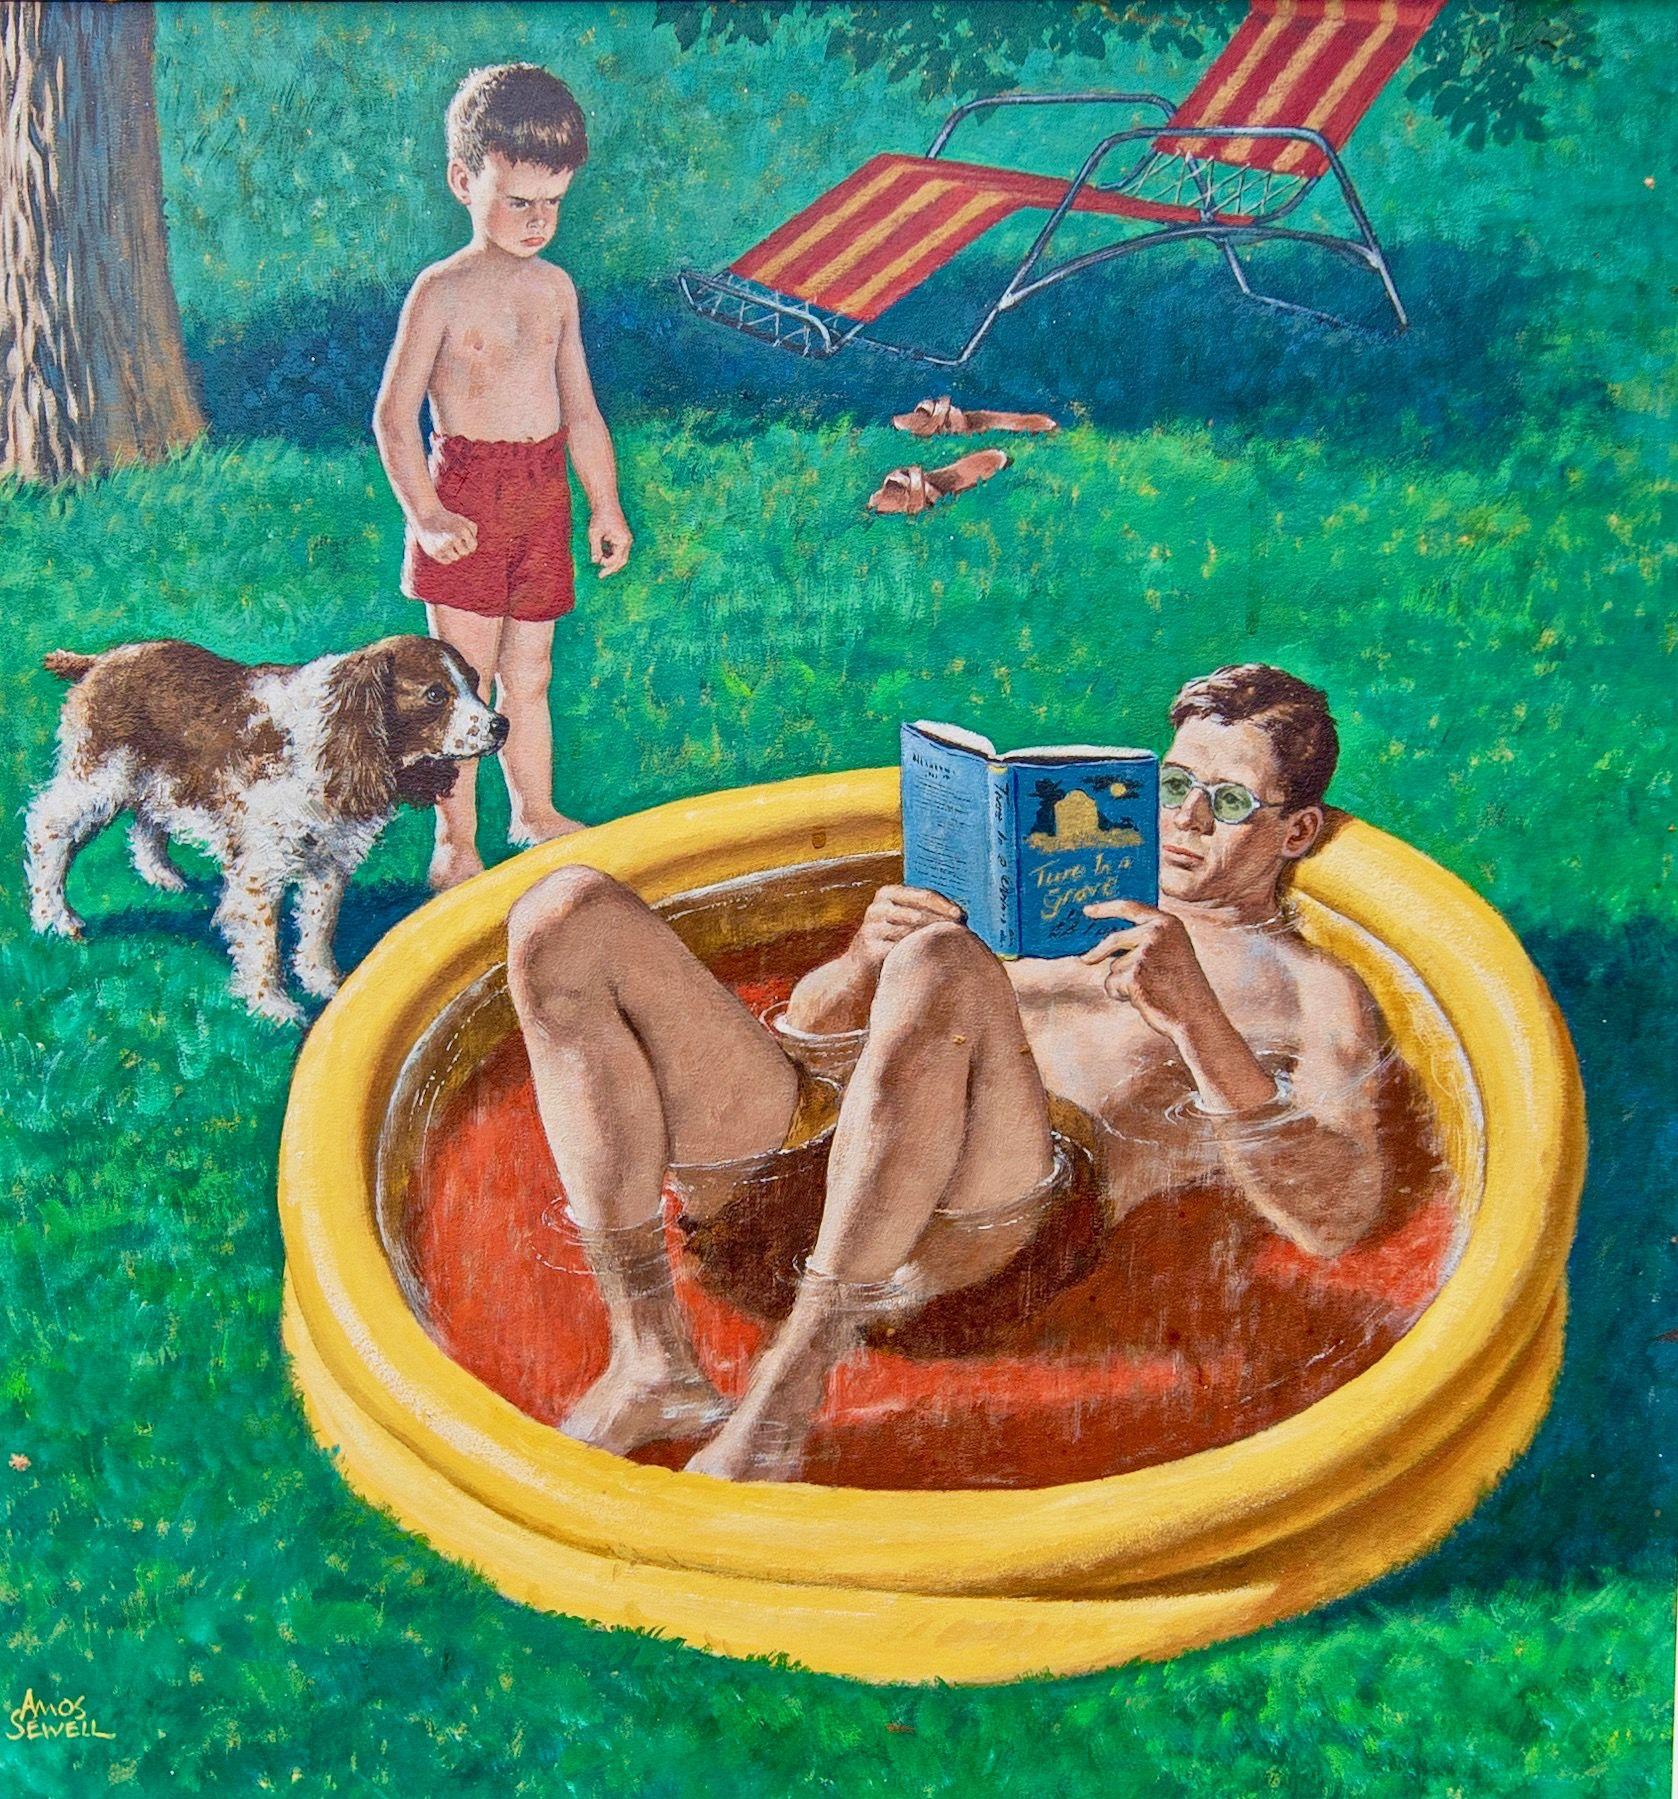 Amos Sewell Figurative Art - Wading Pool, Saturday Evening Post Cover